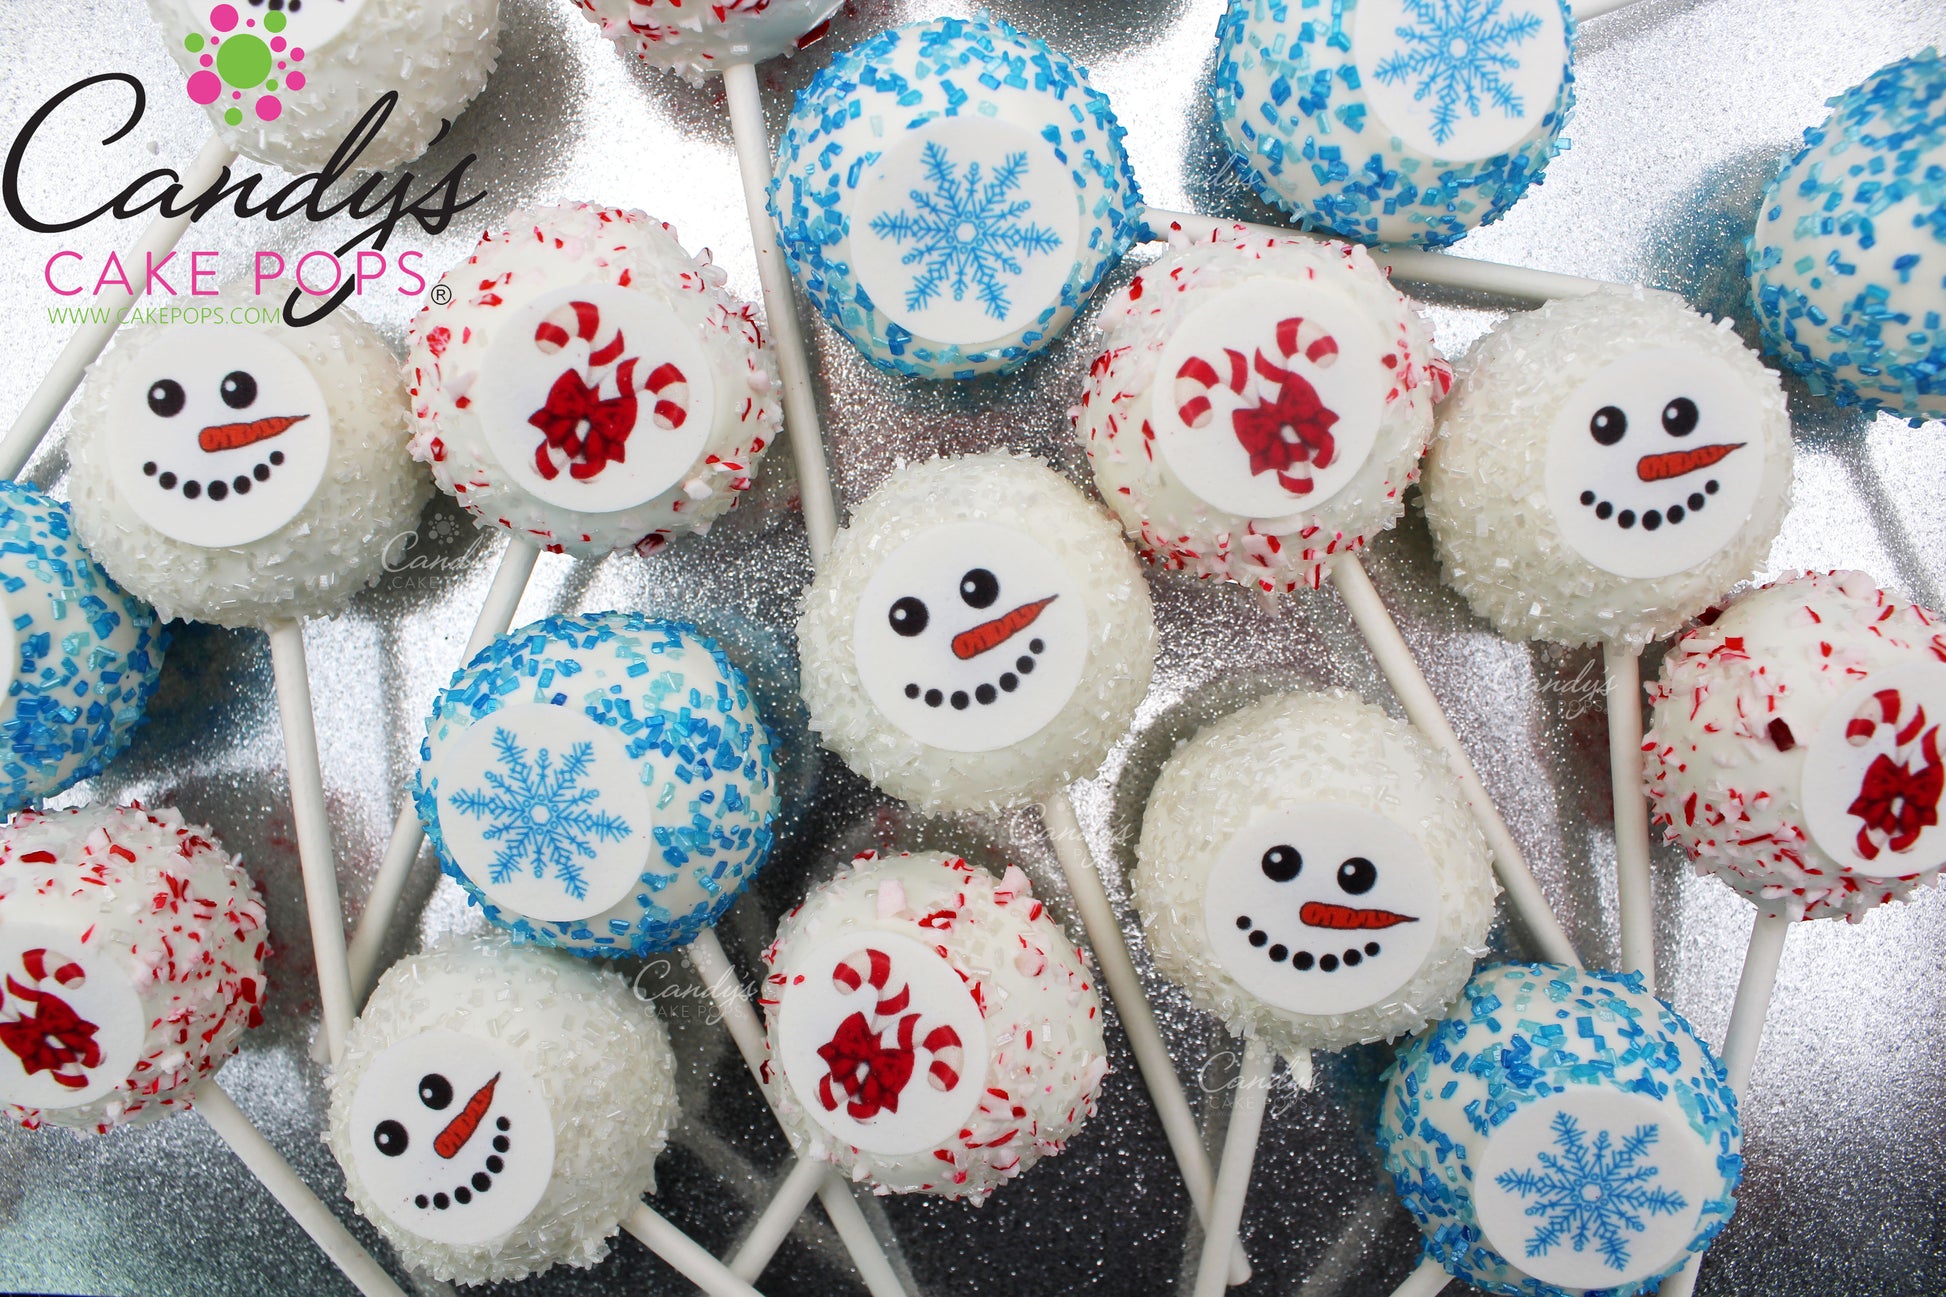 Pre-Order: Jolly Winter Deluxe Cake Pops (Shipping Dec. 1st-31st) - Candy's Cake Pops